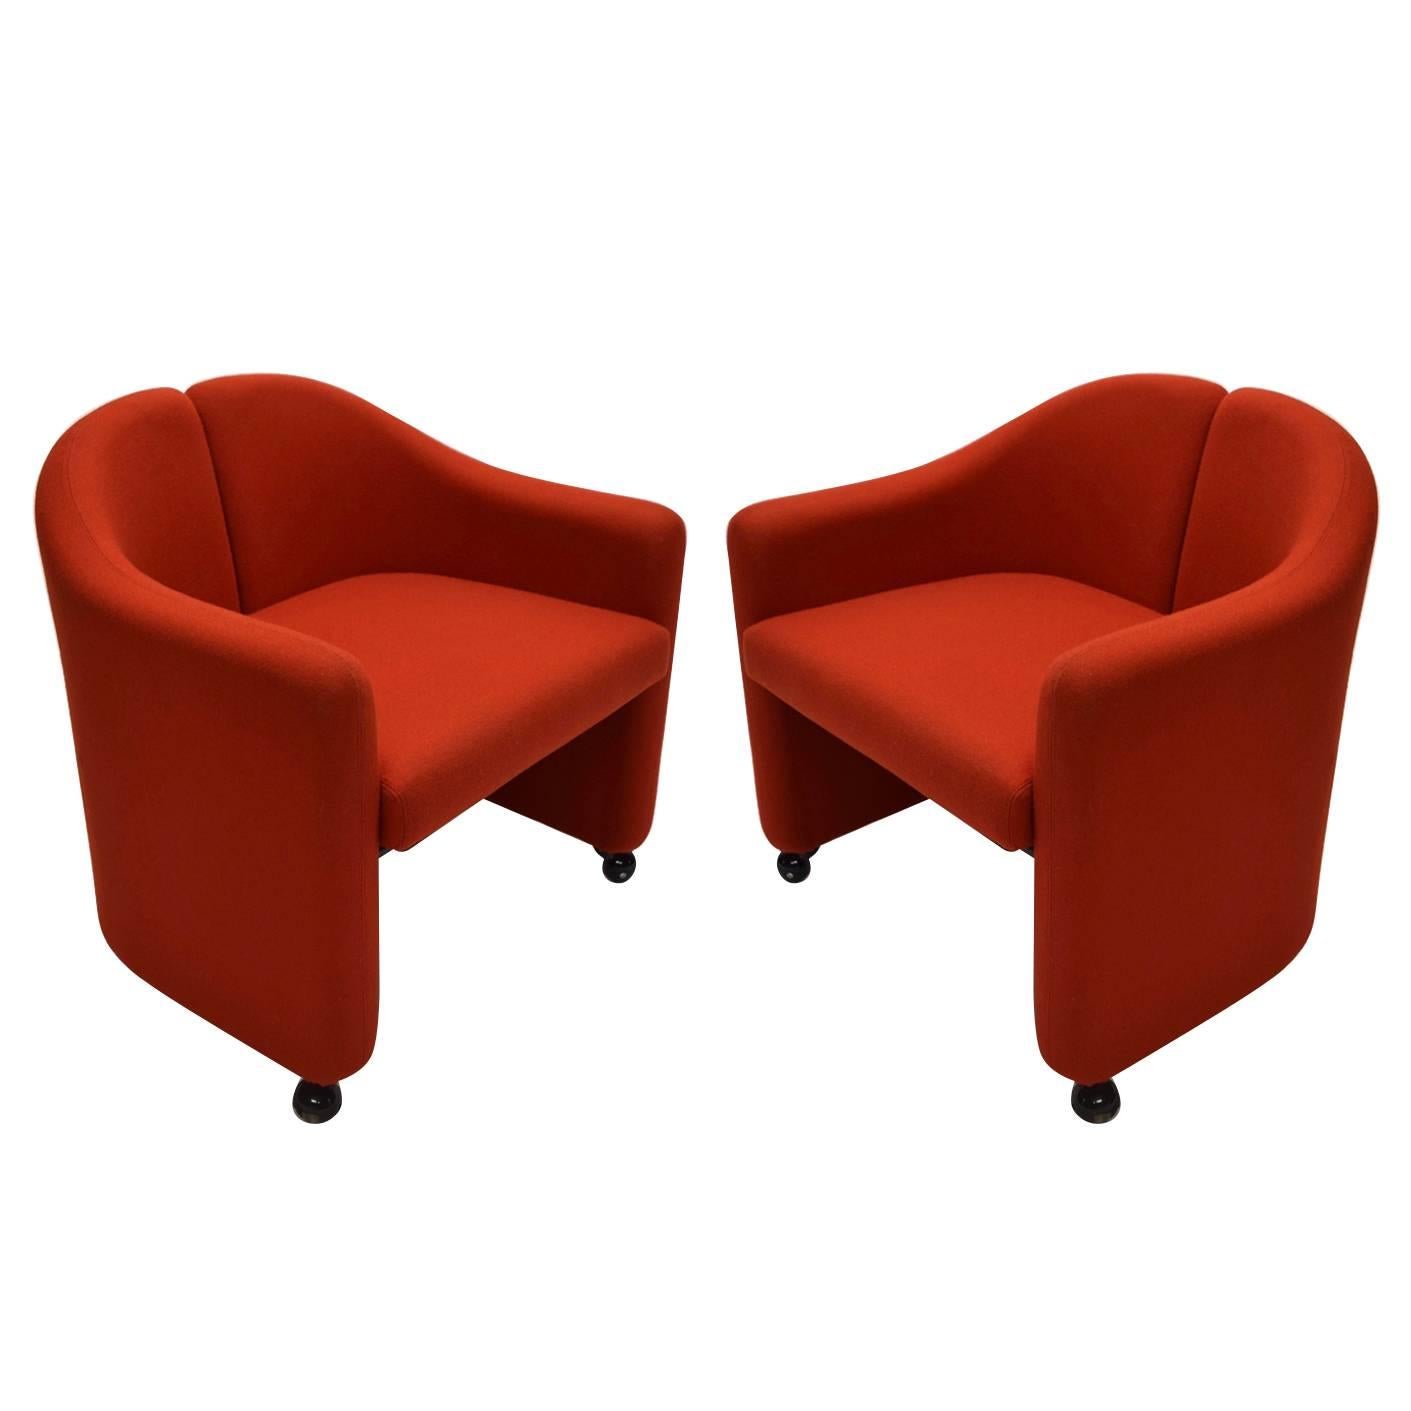 Pair of Chairs Designed by Eugenio Gerli for Tecno "142 Series" 1966 Milan Italy